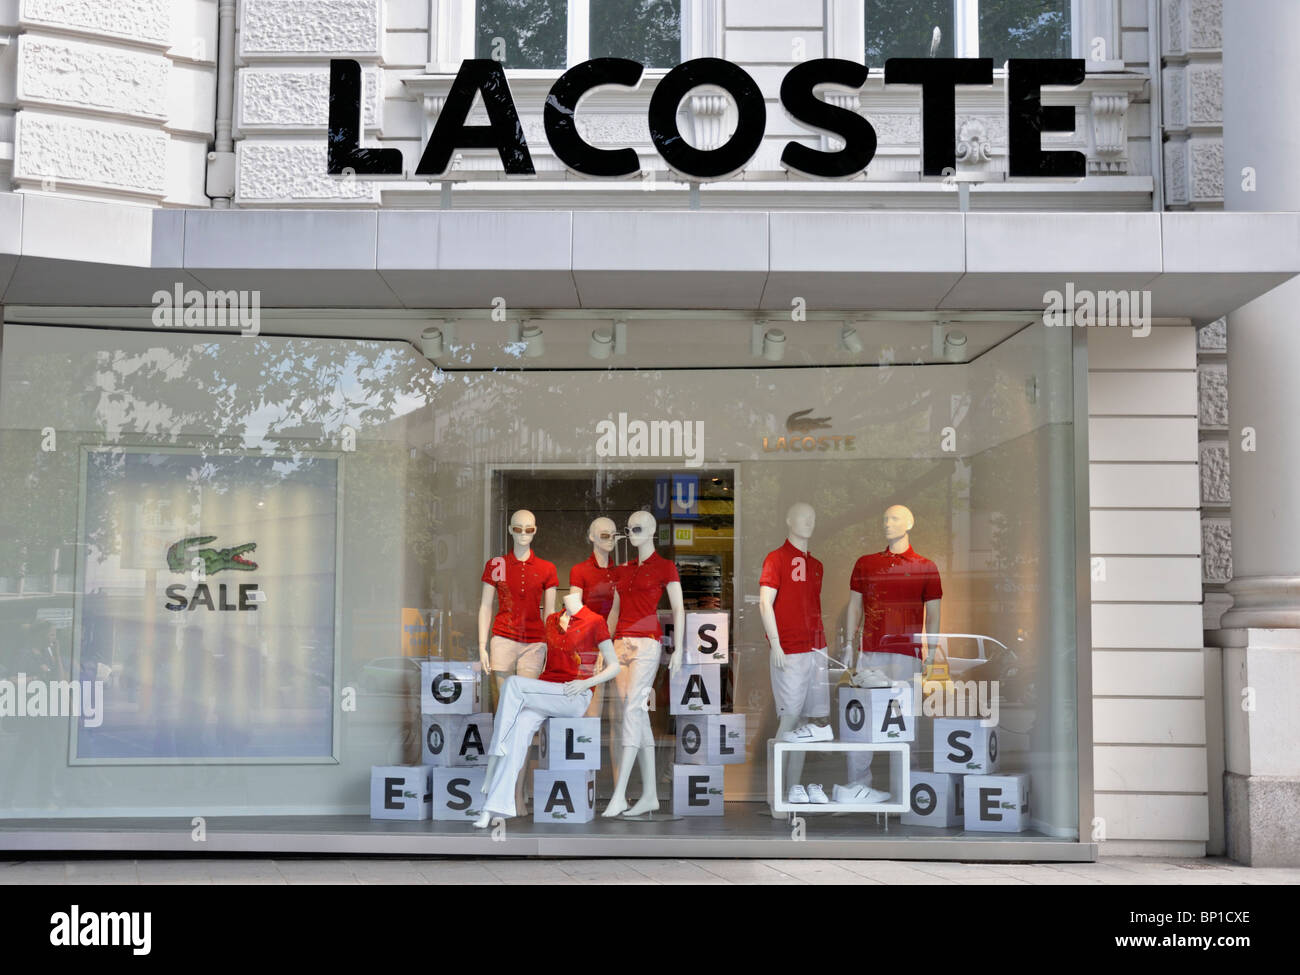 Lacoste clothing store display with 